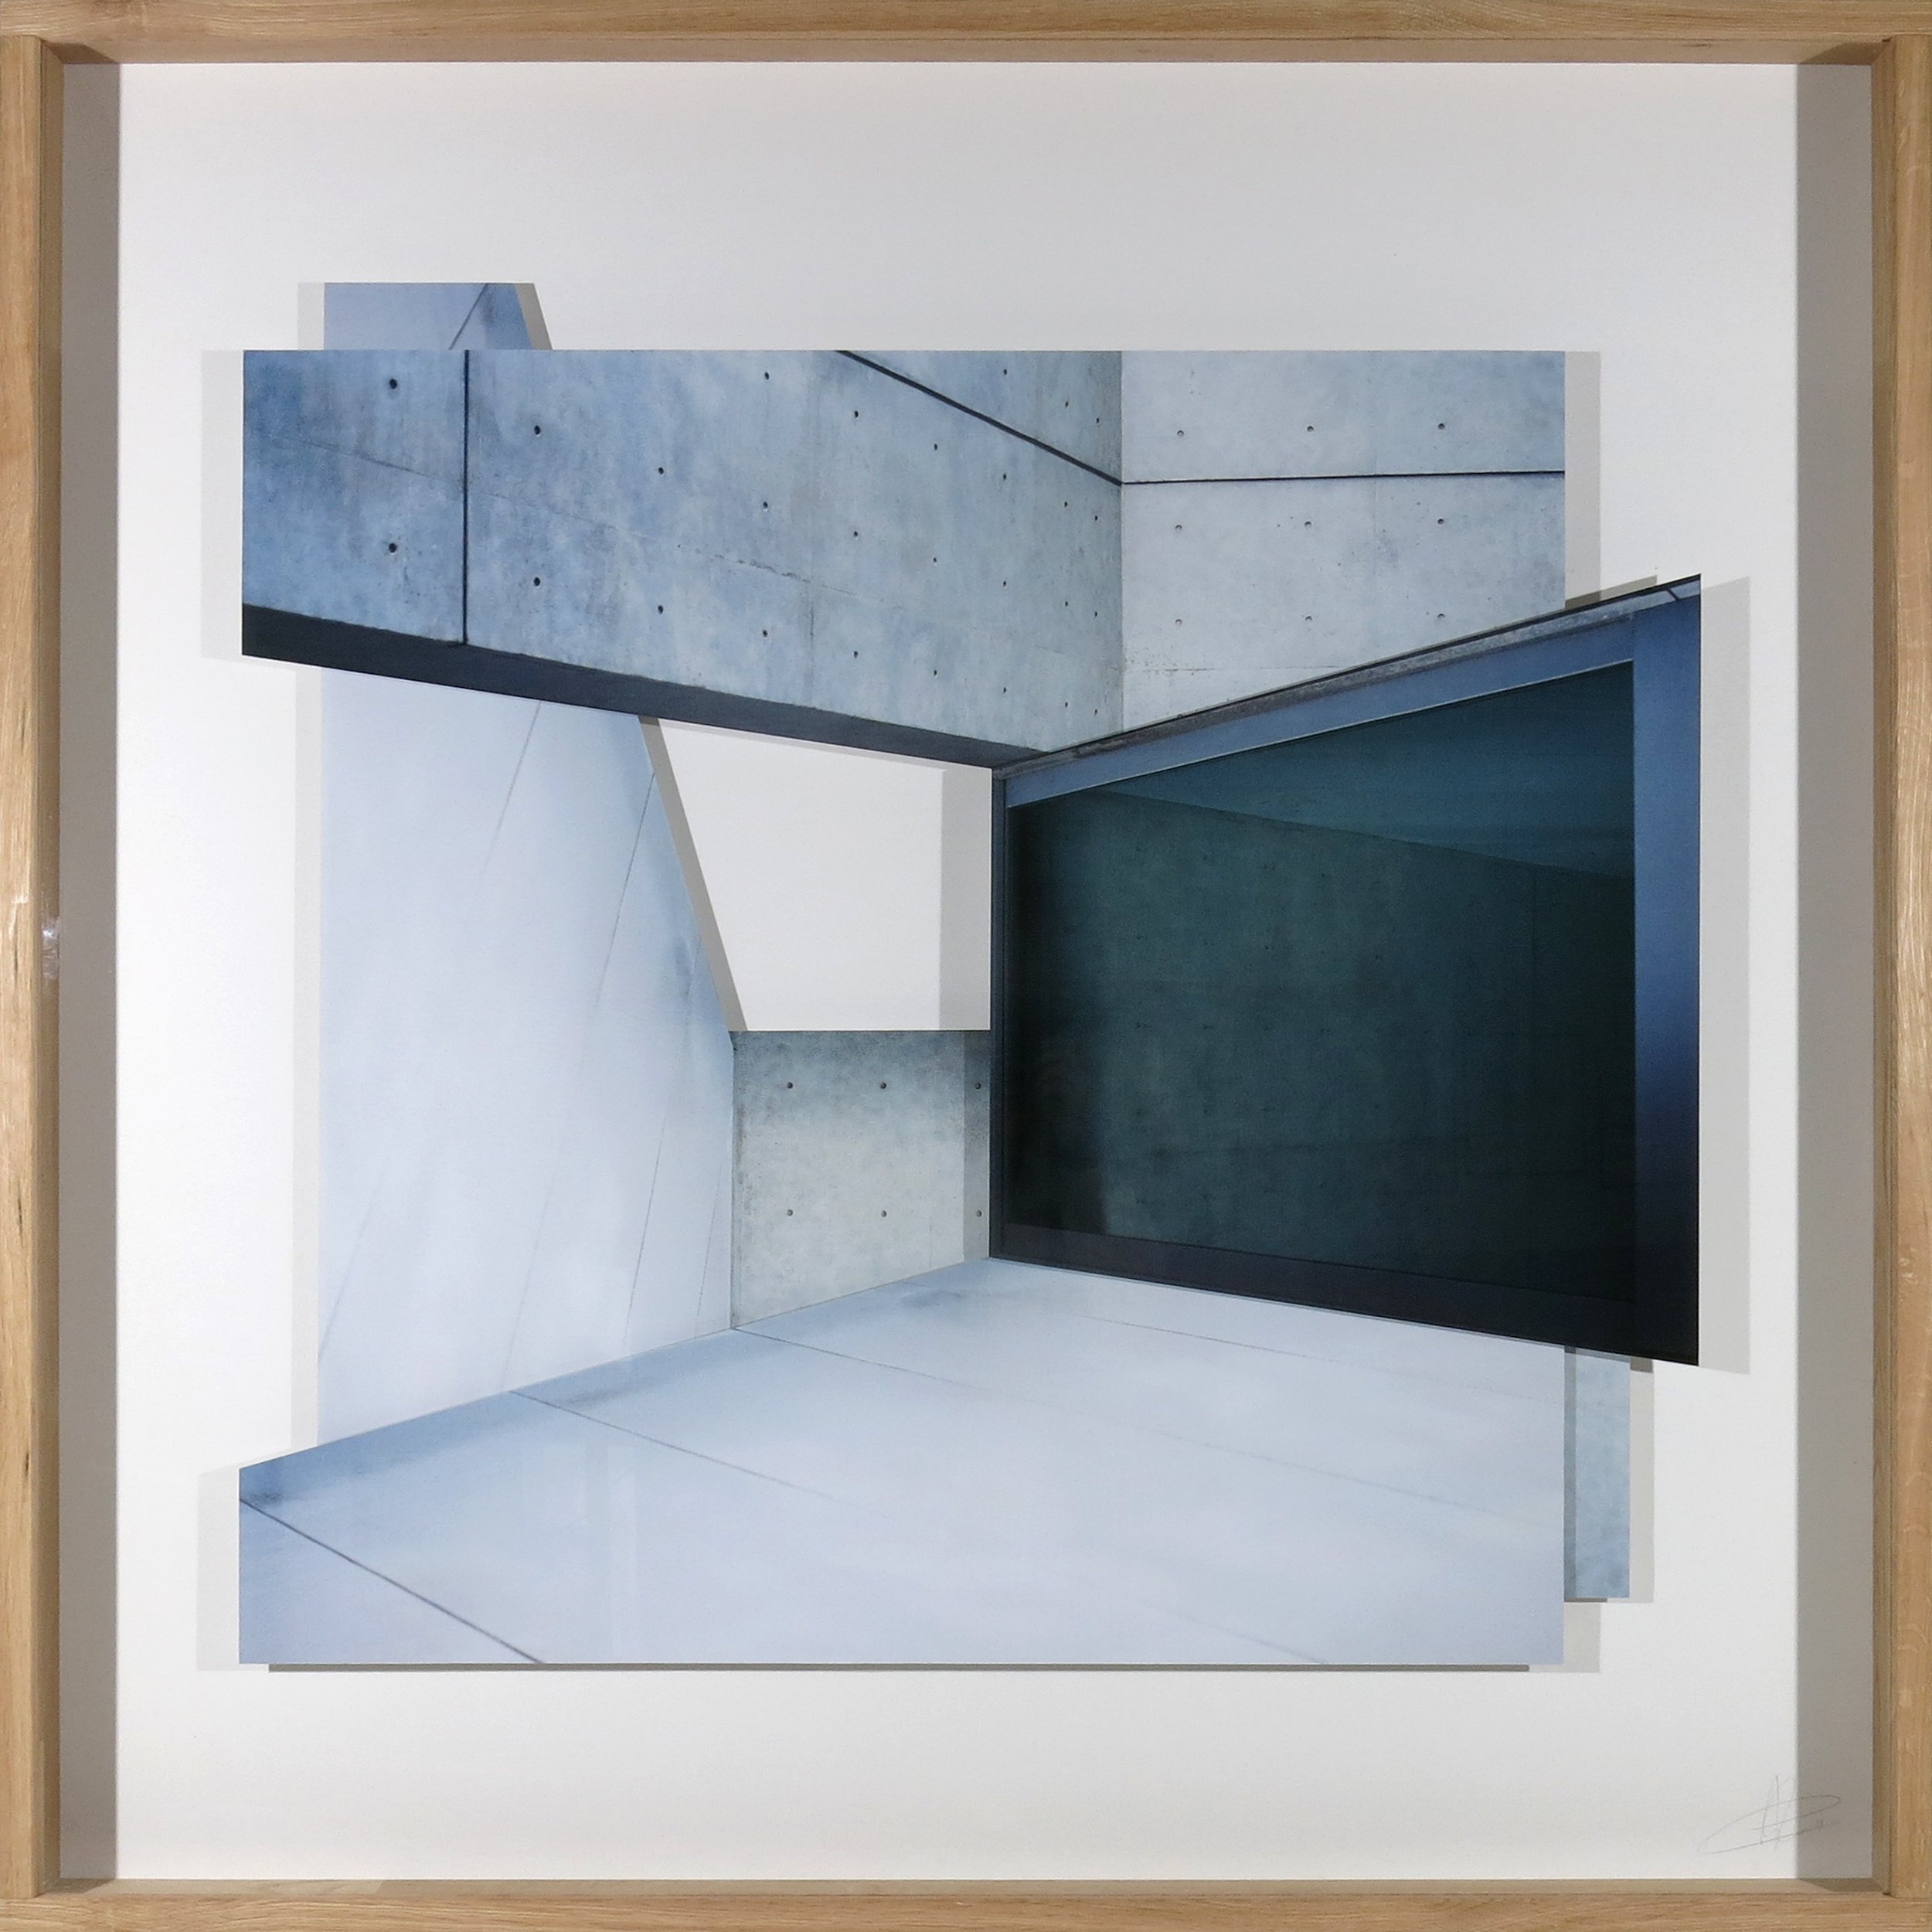  “Tadaoando”, Series Gravitación Visual, 150 x 150 cm, Analogic photography made with Hasselblad camera with medium format, with Portra 400 film, digitalized and printed on Hahnemühle Fine Art Photo Rag with pigmented inks 